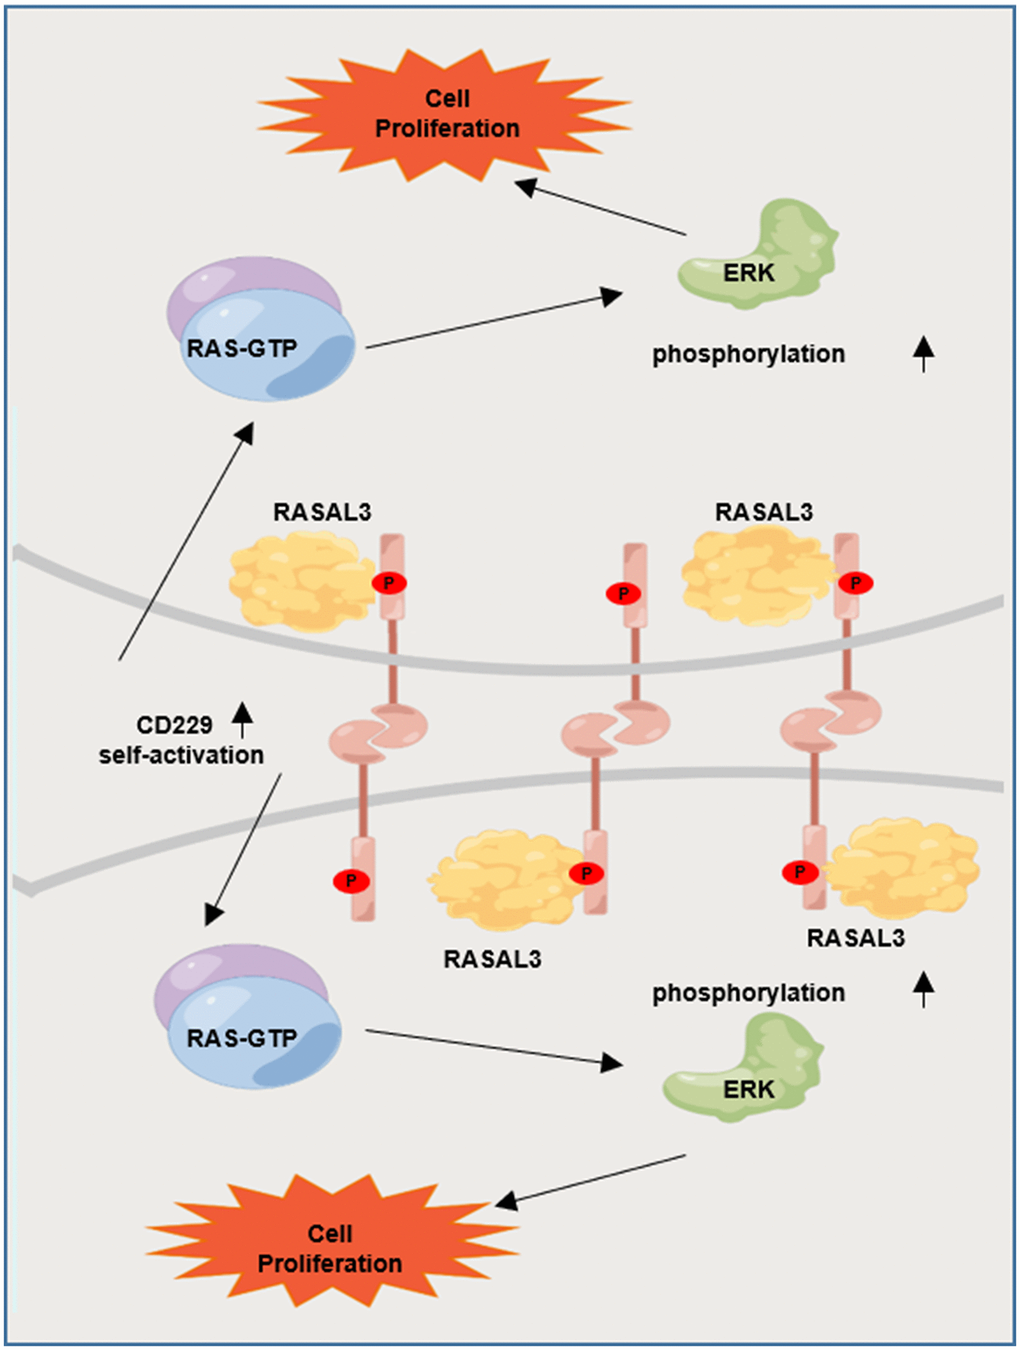 Graphic working model illustrates that tyrosine phosphorylation-mediated CD229 self-activation regulates the downstream RAS/ERK pathway by interacting with RASAL3.